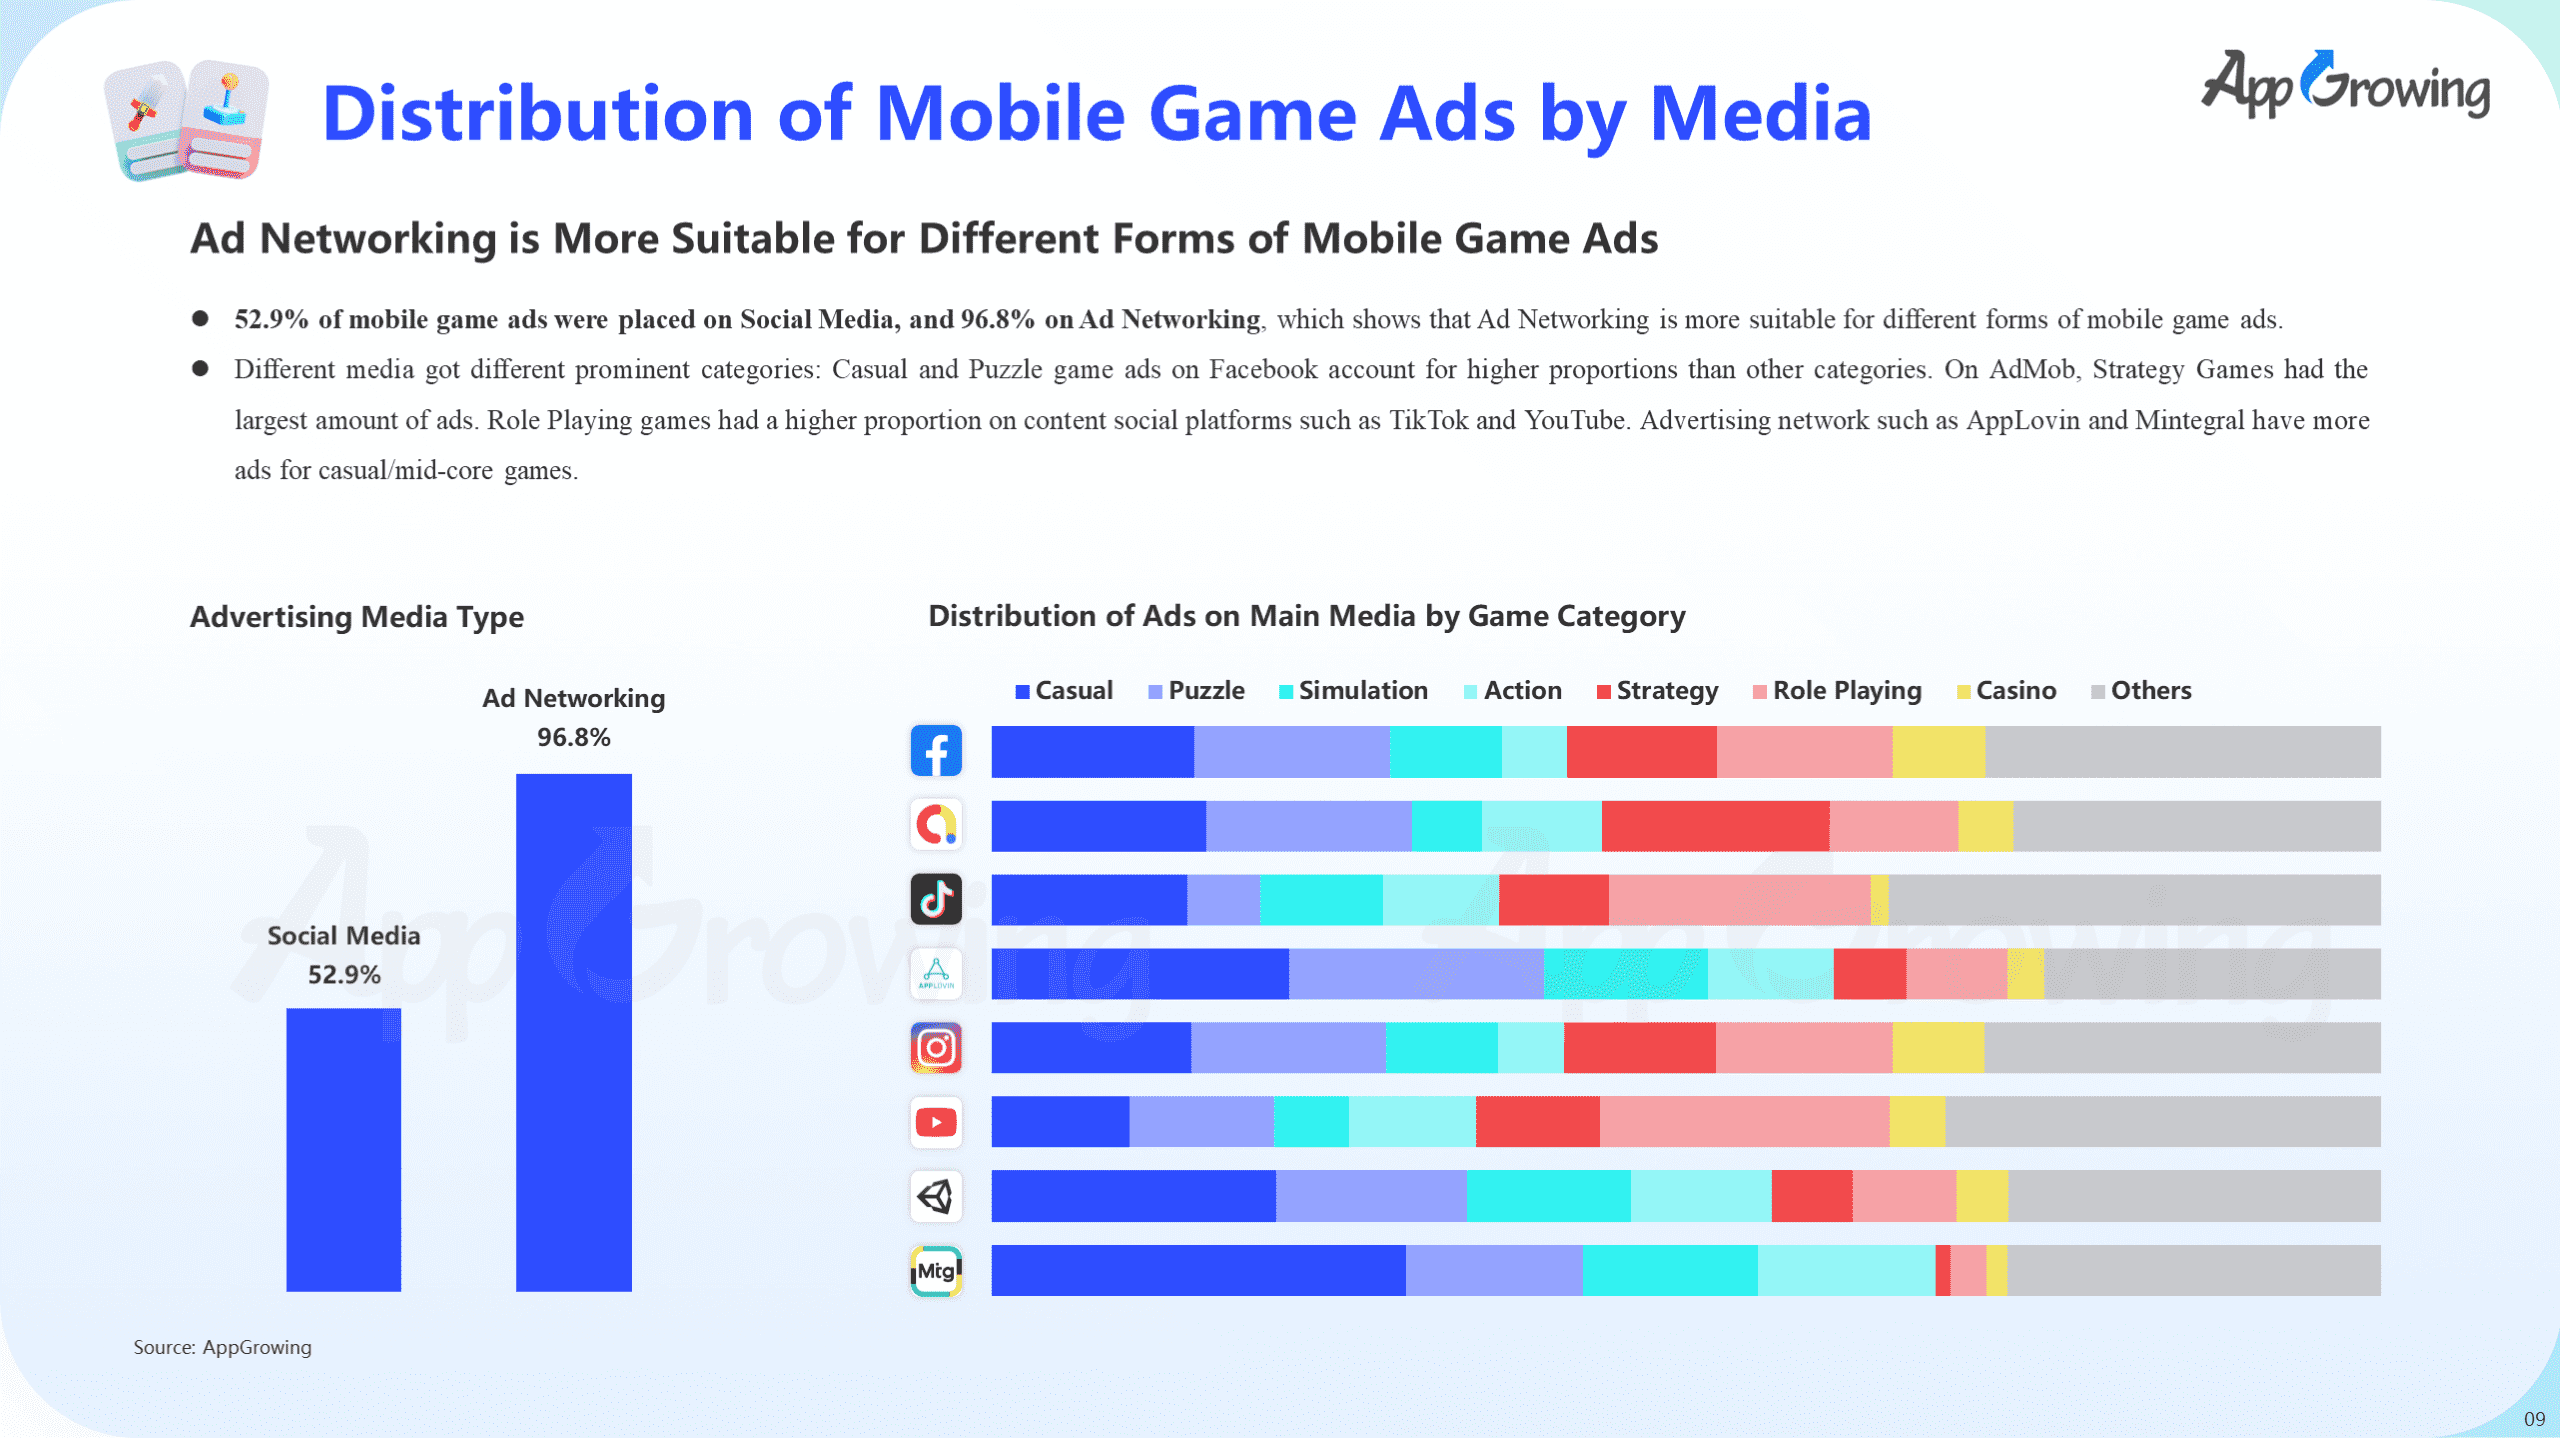 Mobile gaming industry state and marketing analysis in H1 2022 - Business  of Apps